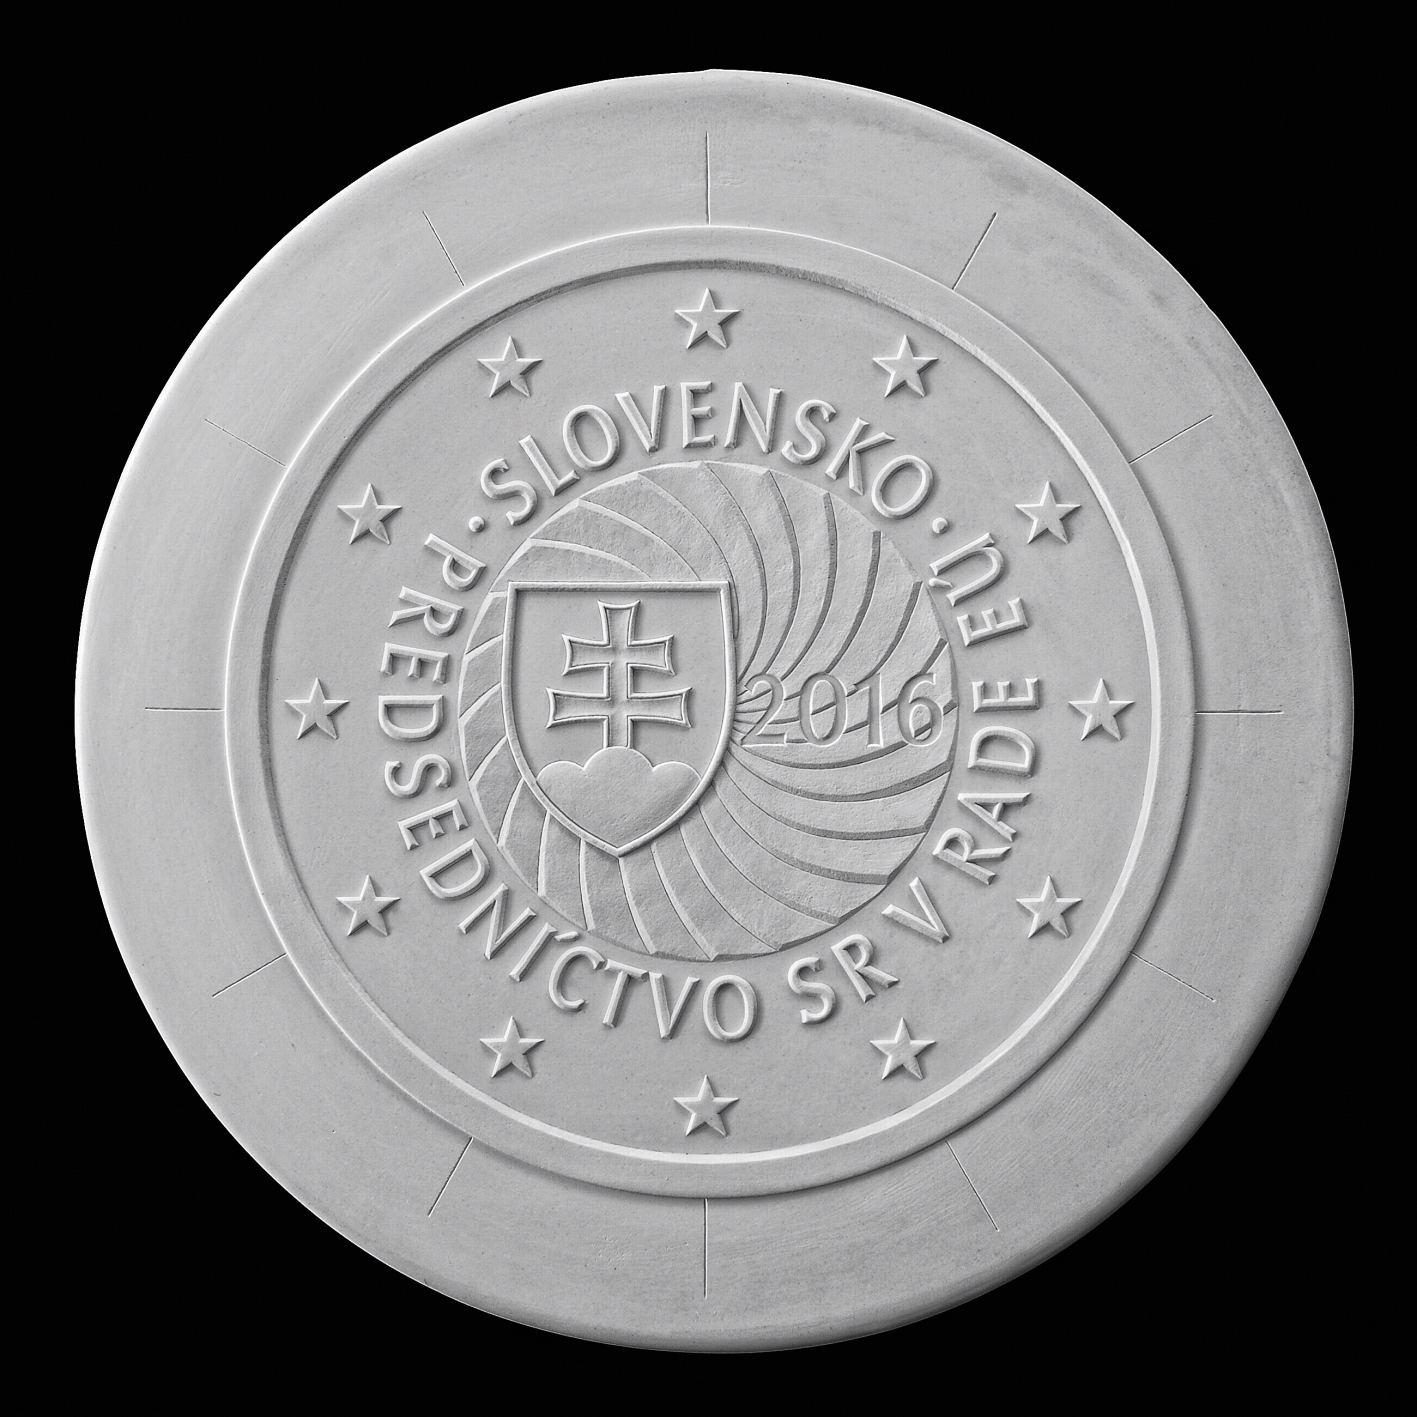 First prize (design selected for the coin)